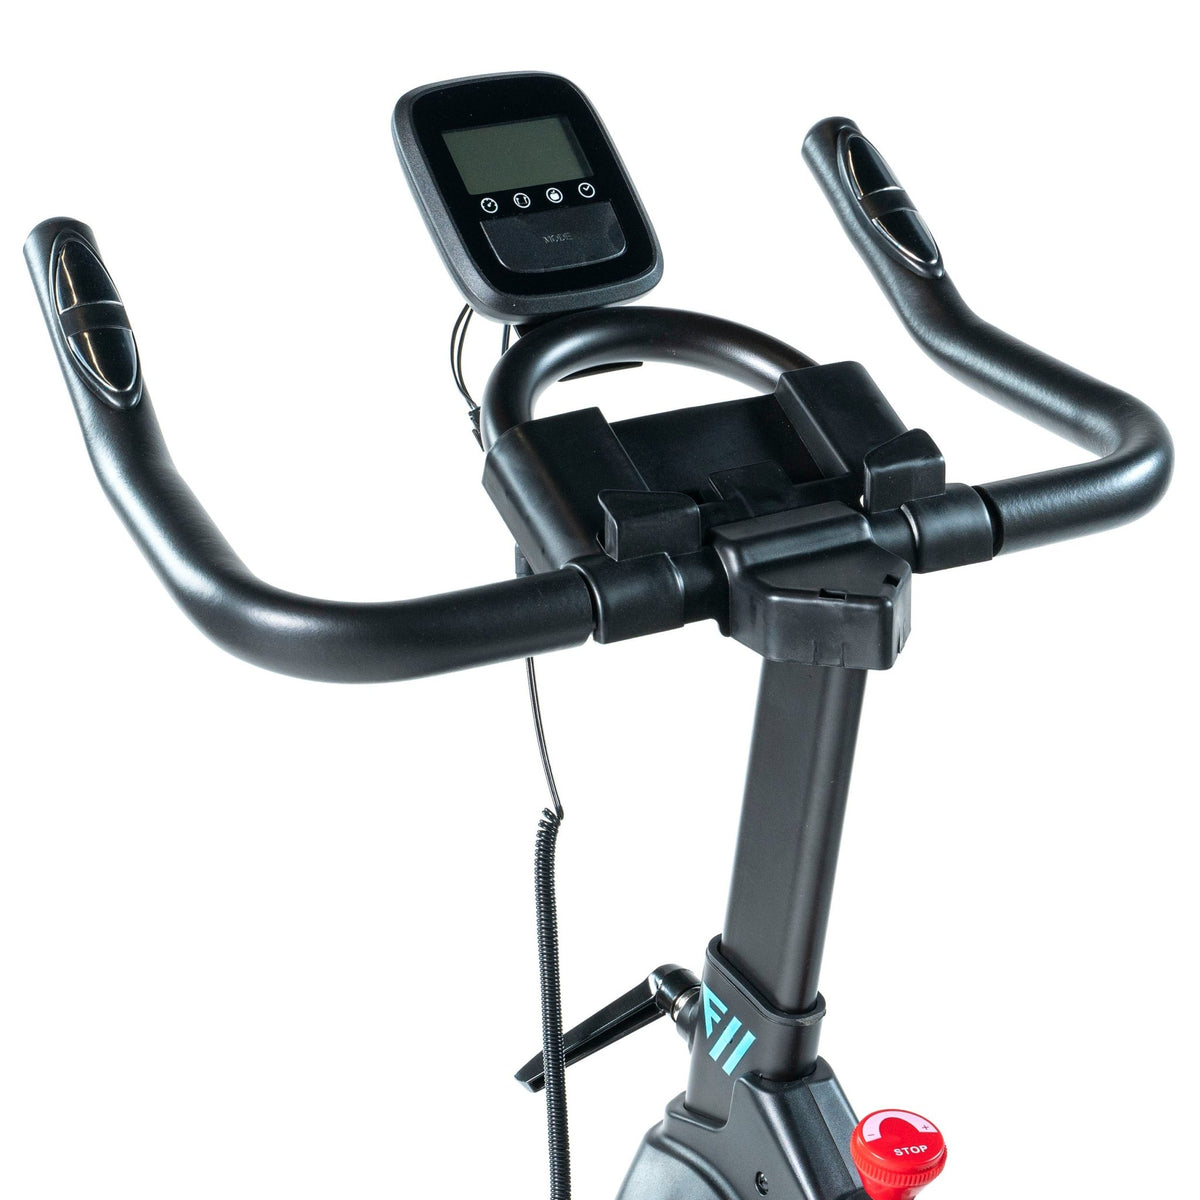 FitWay Equip. 500IC Indoor Cycle console view 